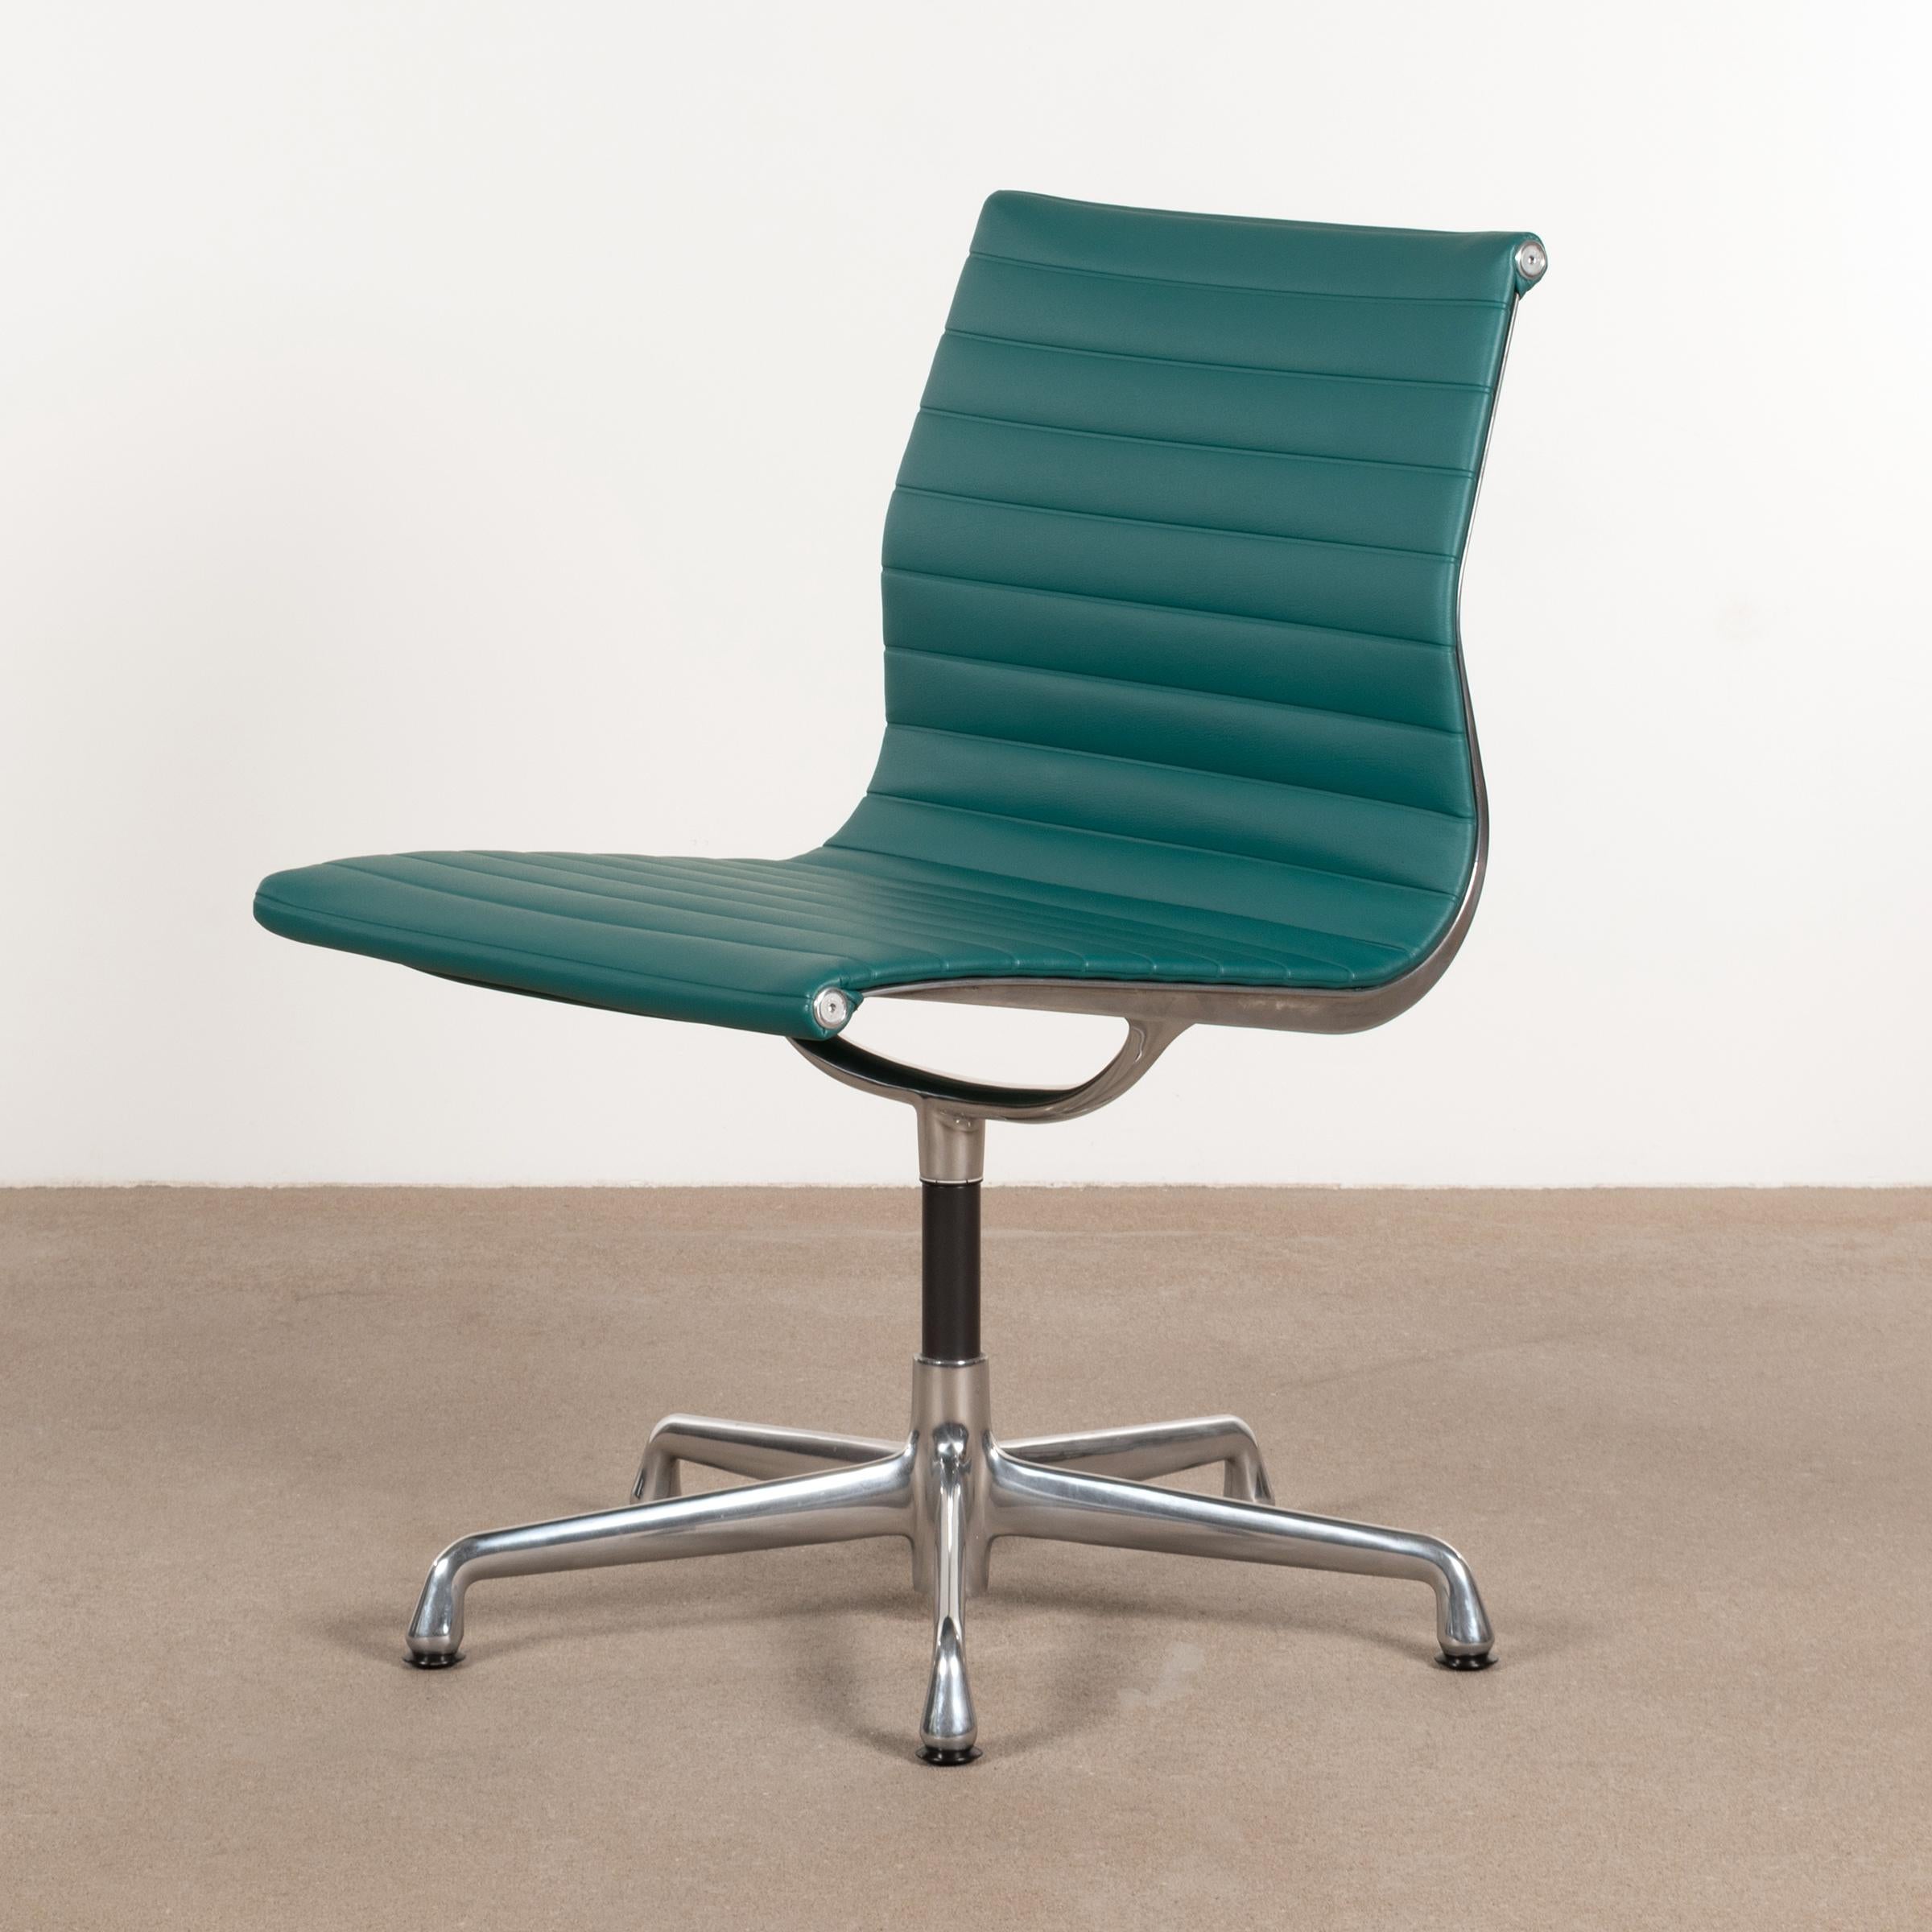 American Eames Conference Chair in Turquoise Vinyl for Herman Miller, USA